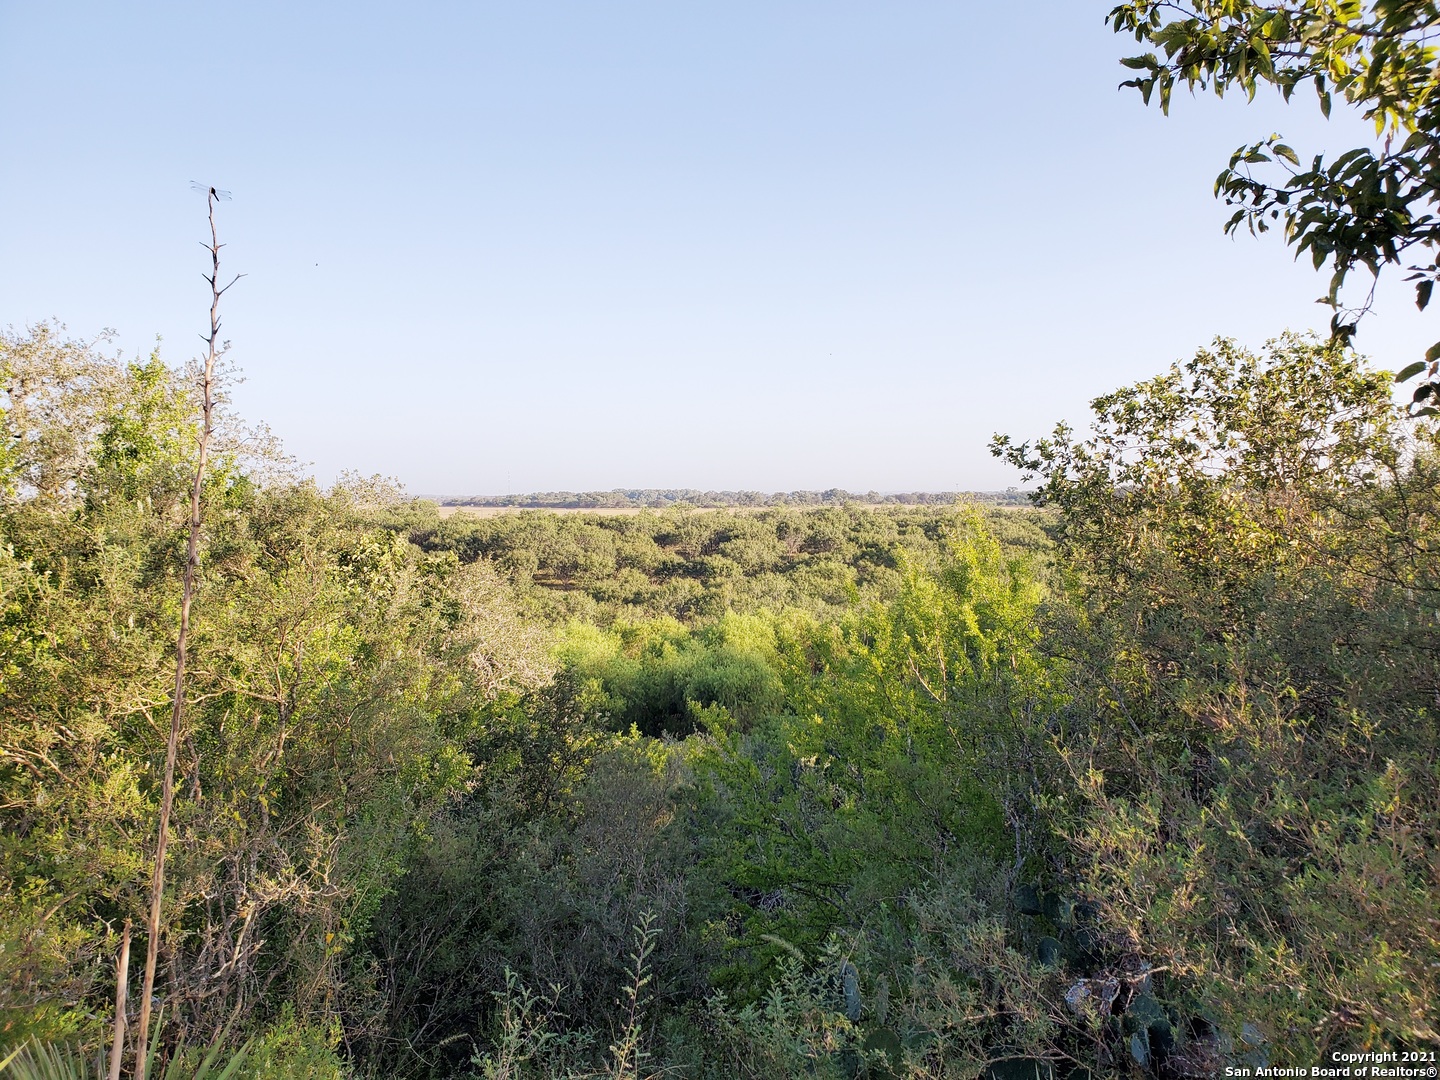 LOOKING FOR A RANCH WITH NATIVE WOODLANDS AND PLENTIFUL HUNTING AND RECREATIONAL OPPORTUNITIES, ALONG WITH ACREAGE FOR GRAZING AND HAY PRODUCTION ? NOT TO MENTION HAY BARN,WORKING PENS,AND A 40X40 SHOP ? ONLY 30 MINUTES FROM SAN ANTONIO AND 5 MINUTES FROM HEB OR WALMART ? IMPOSSIBLE YOU SAY? THINK AGAIN !! THIS HOME AND 38.06 ACRES IS TAKEN OUT OF A LARGER 106 ACRE PARCEL. THE ADDITIONAL ACREAGE IS ALSO AVAILABLE FOR PURCHASE,(SEE MLS # 160312 )